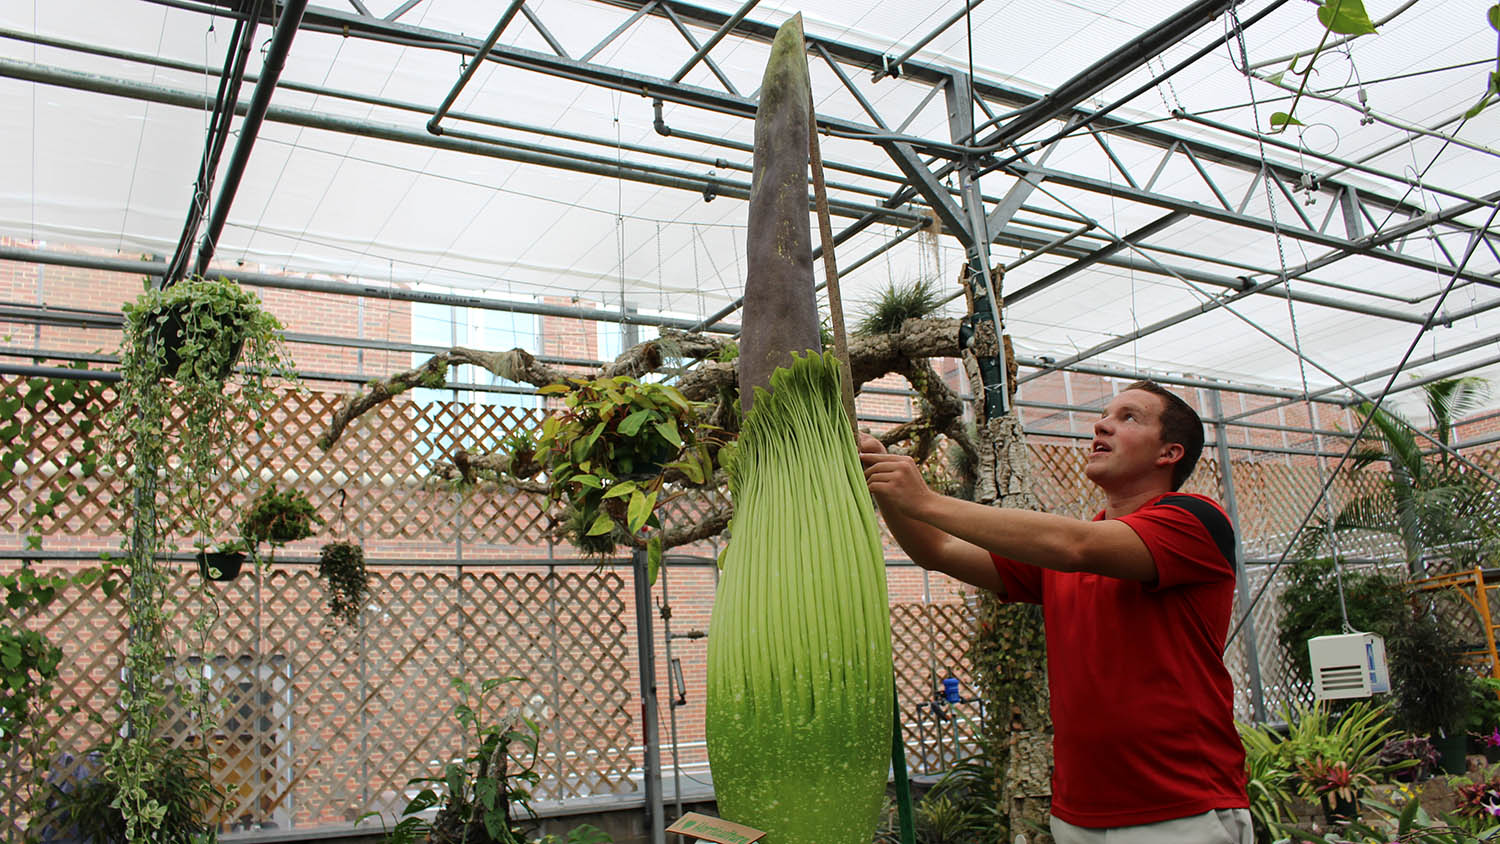 Brandon Huber works with corpse flower